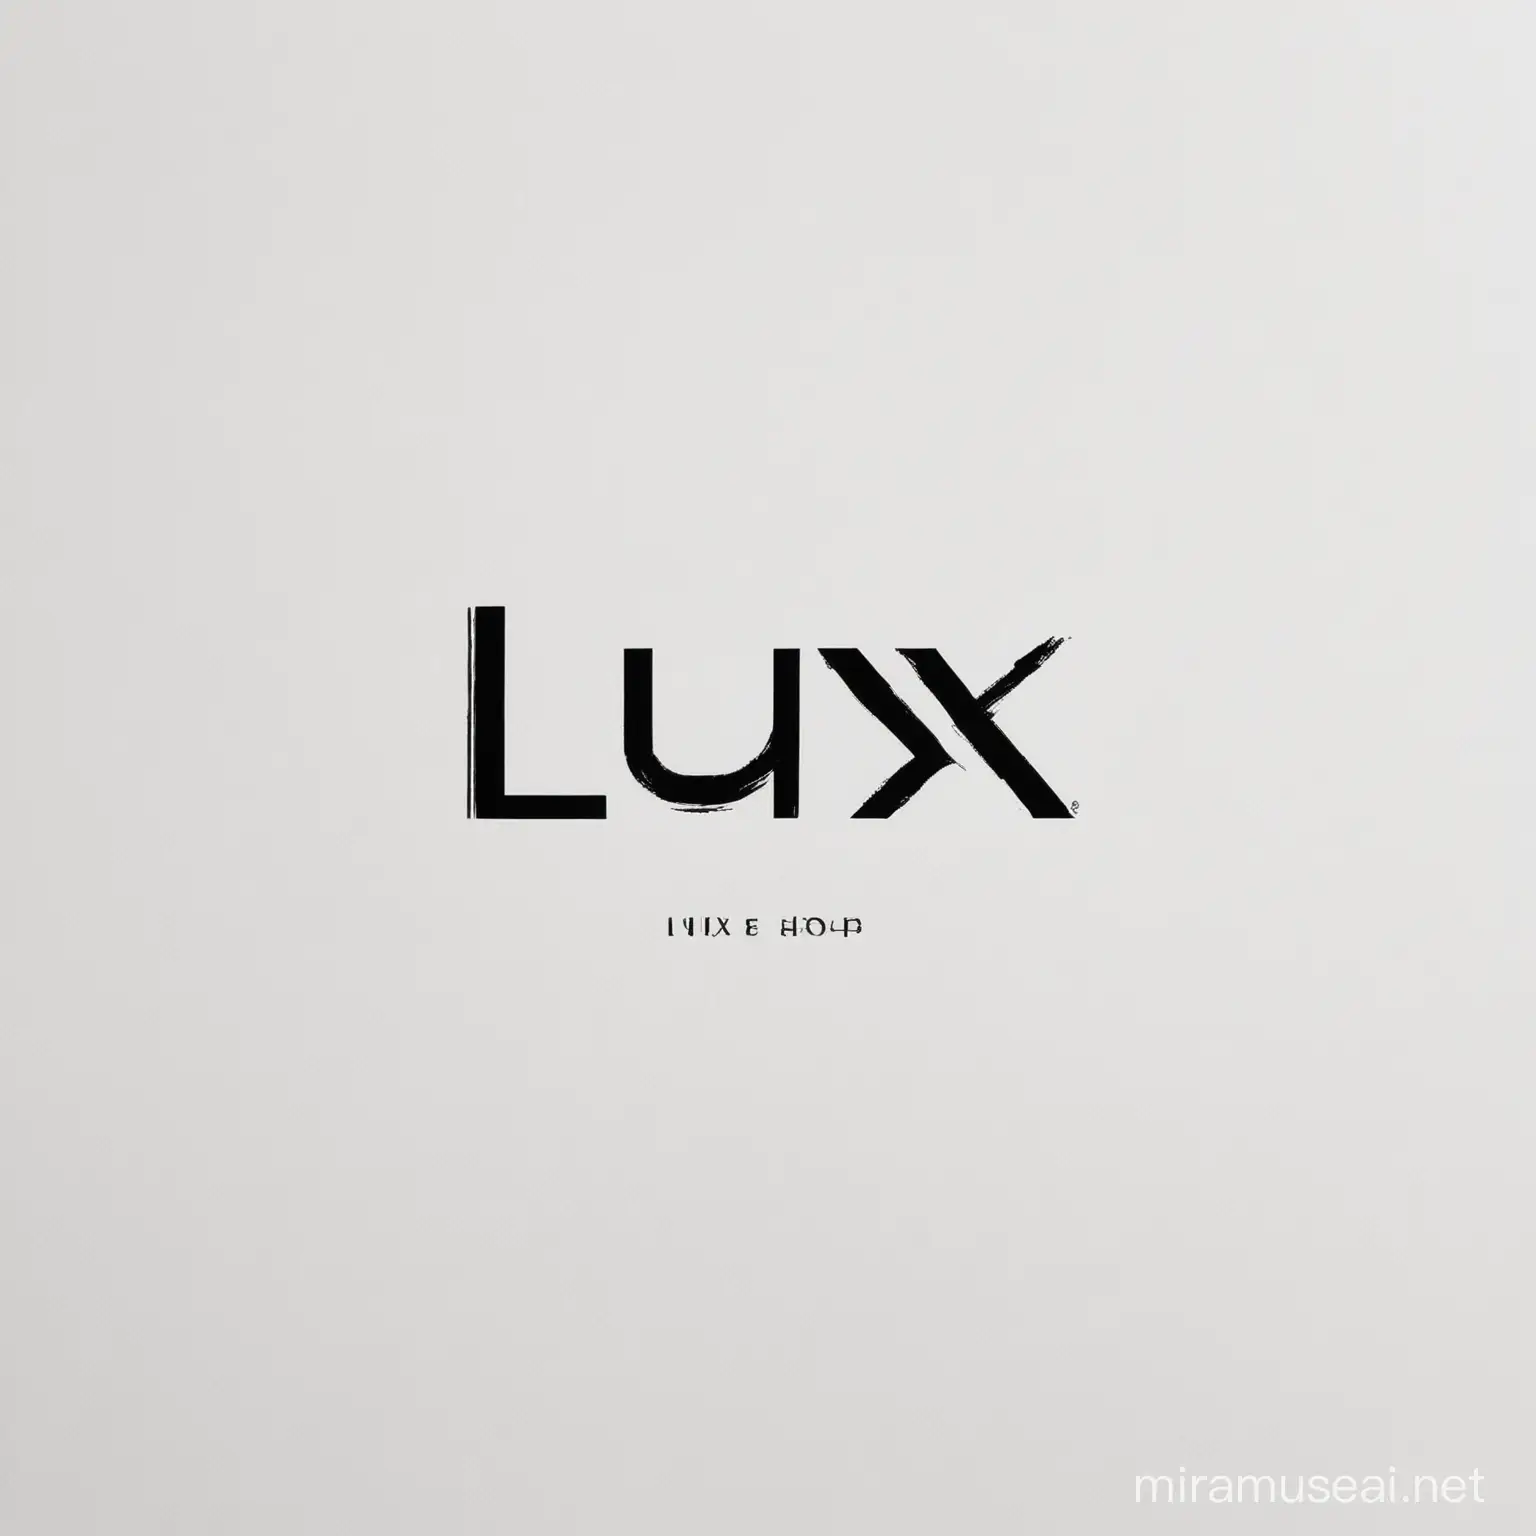 This logo includes minimalistic type feels black letters in white background, which aligns with the name "LUX shop" and the concept of selling clothes.